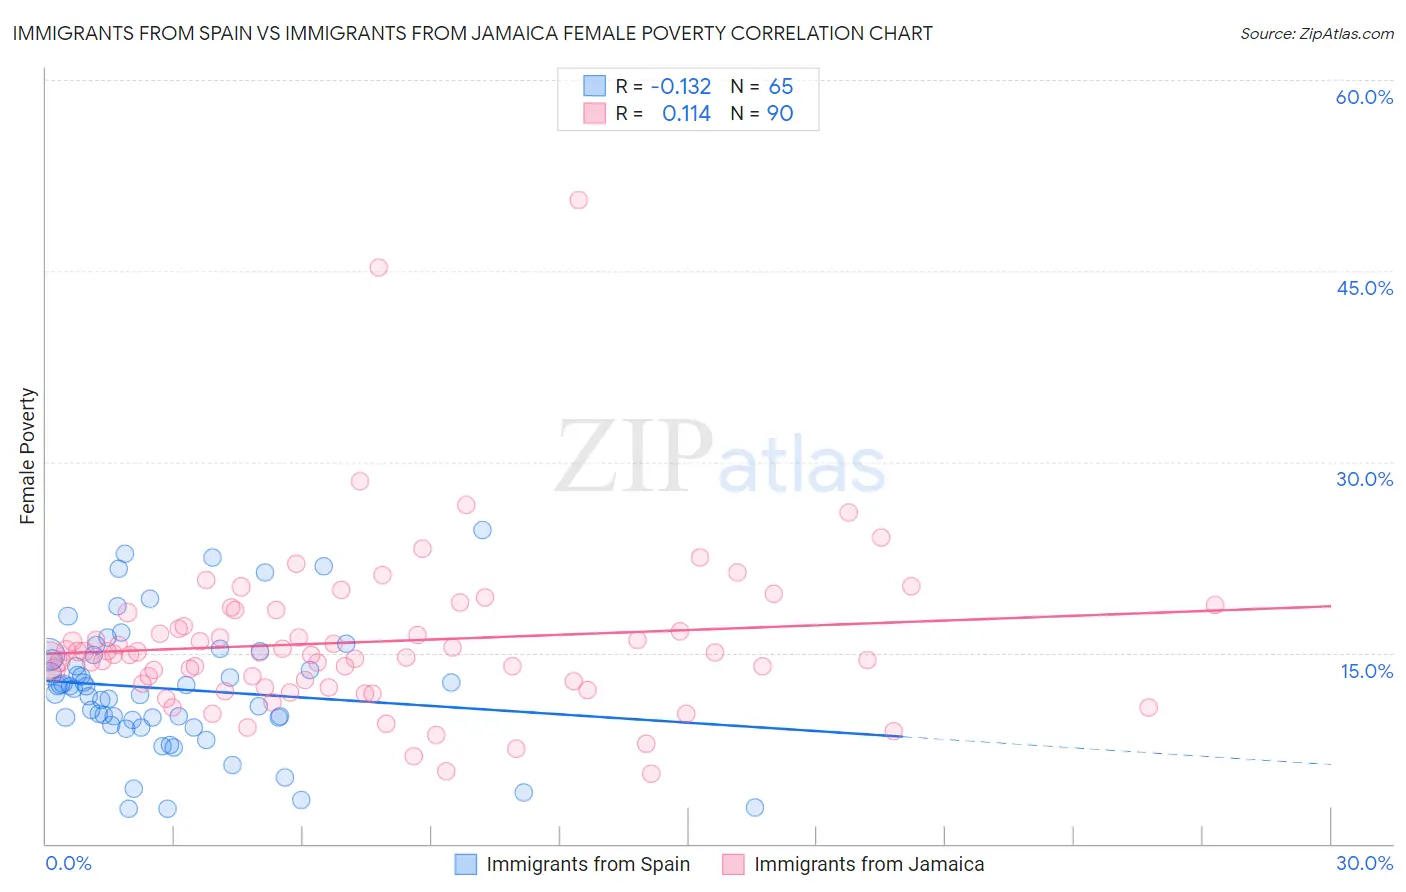 Immigrants from Spain vs Immigrants from Jamaica Female Poverty